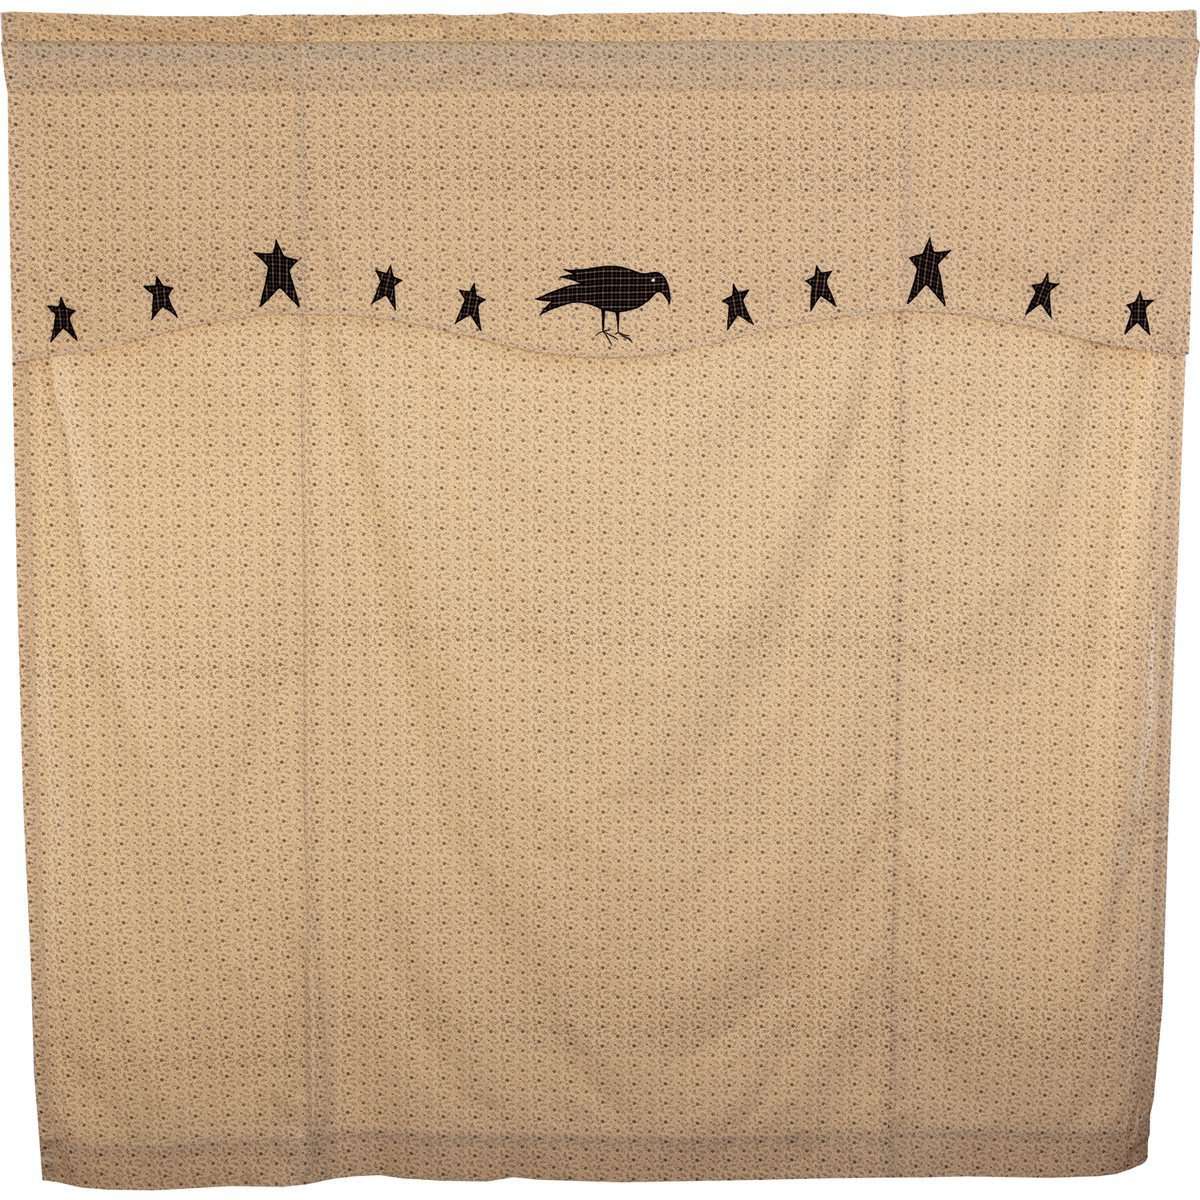 Kettle Grove Shower Curtain with Attached Applique Crow and Star Valance 72"x72" curtain VHC Brands 